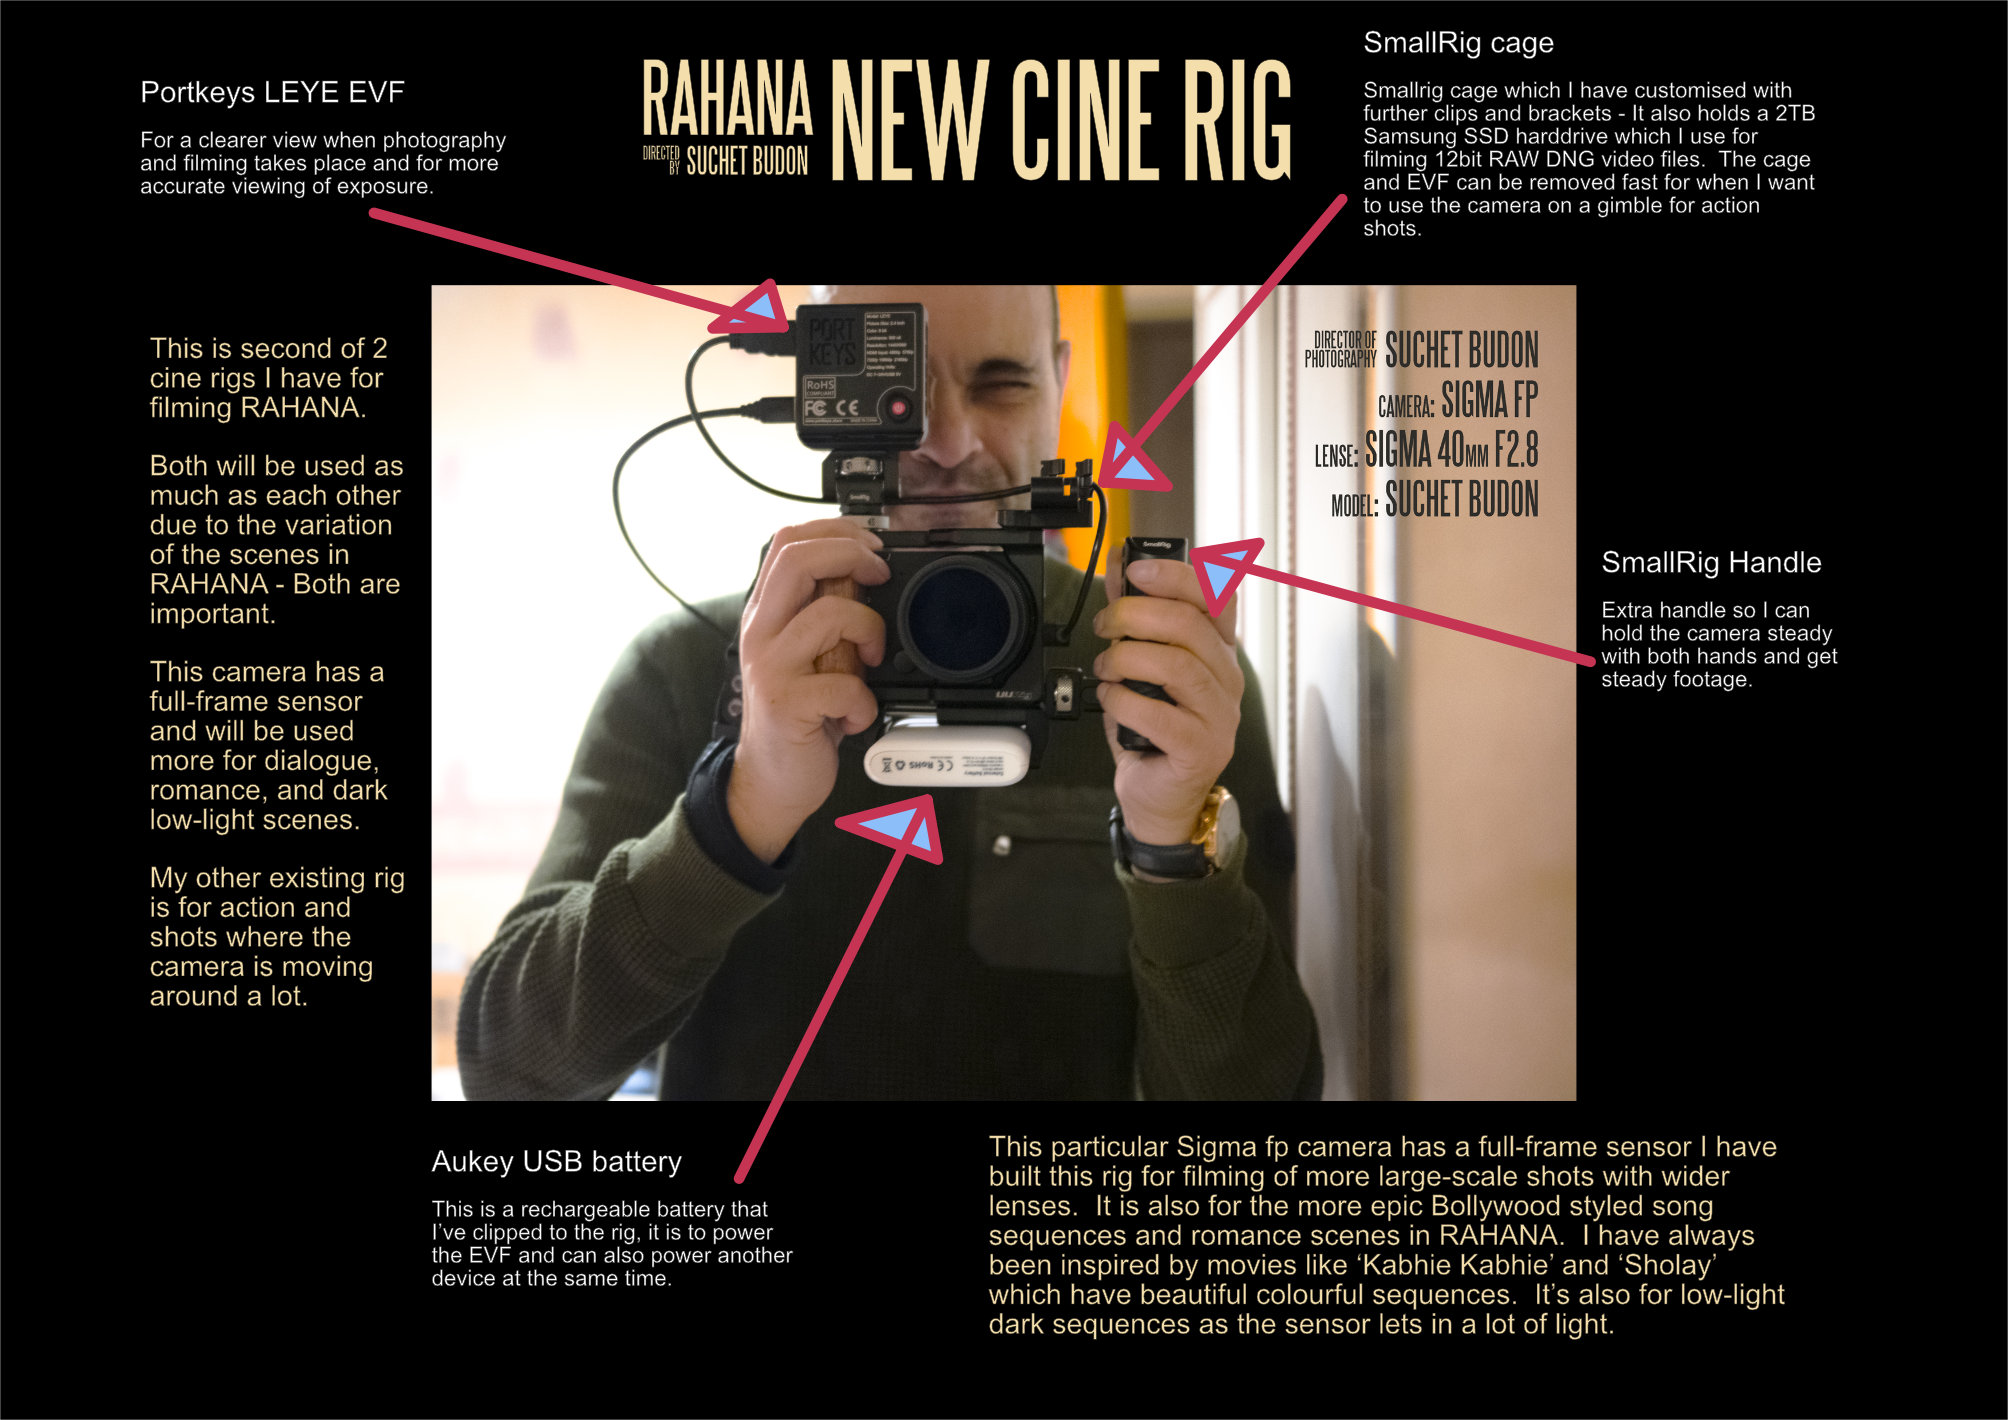 Sigma fp cinematography rig with director Suchet Budon